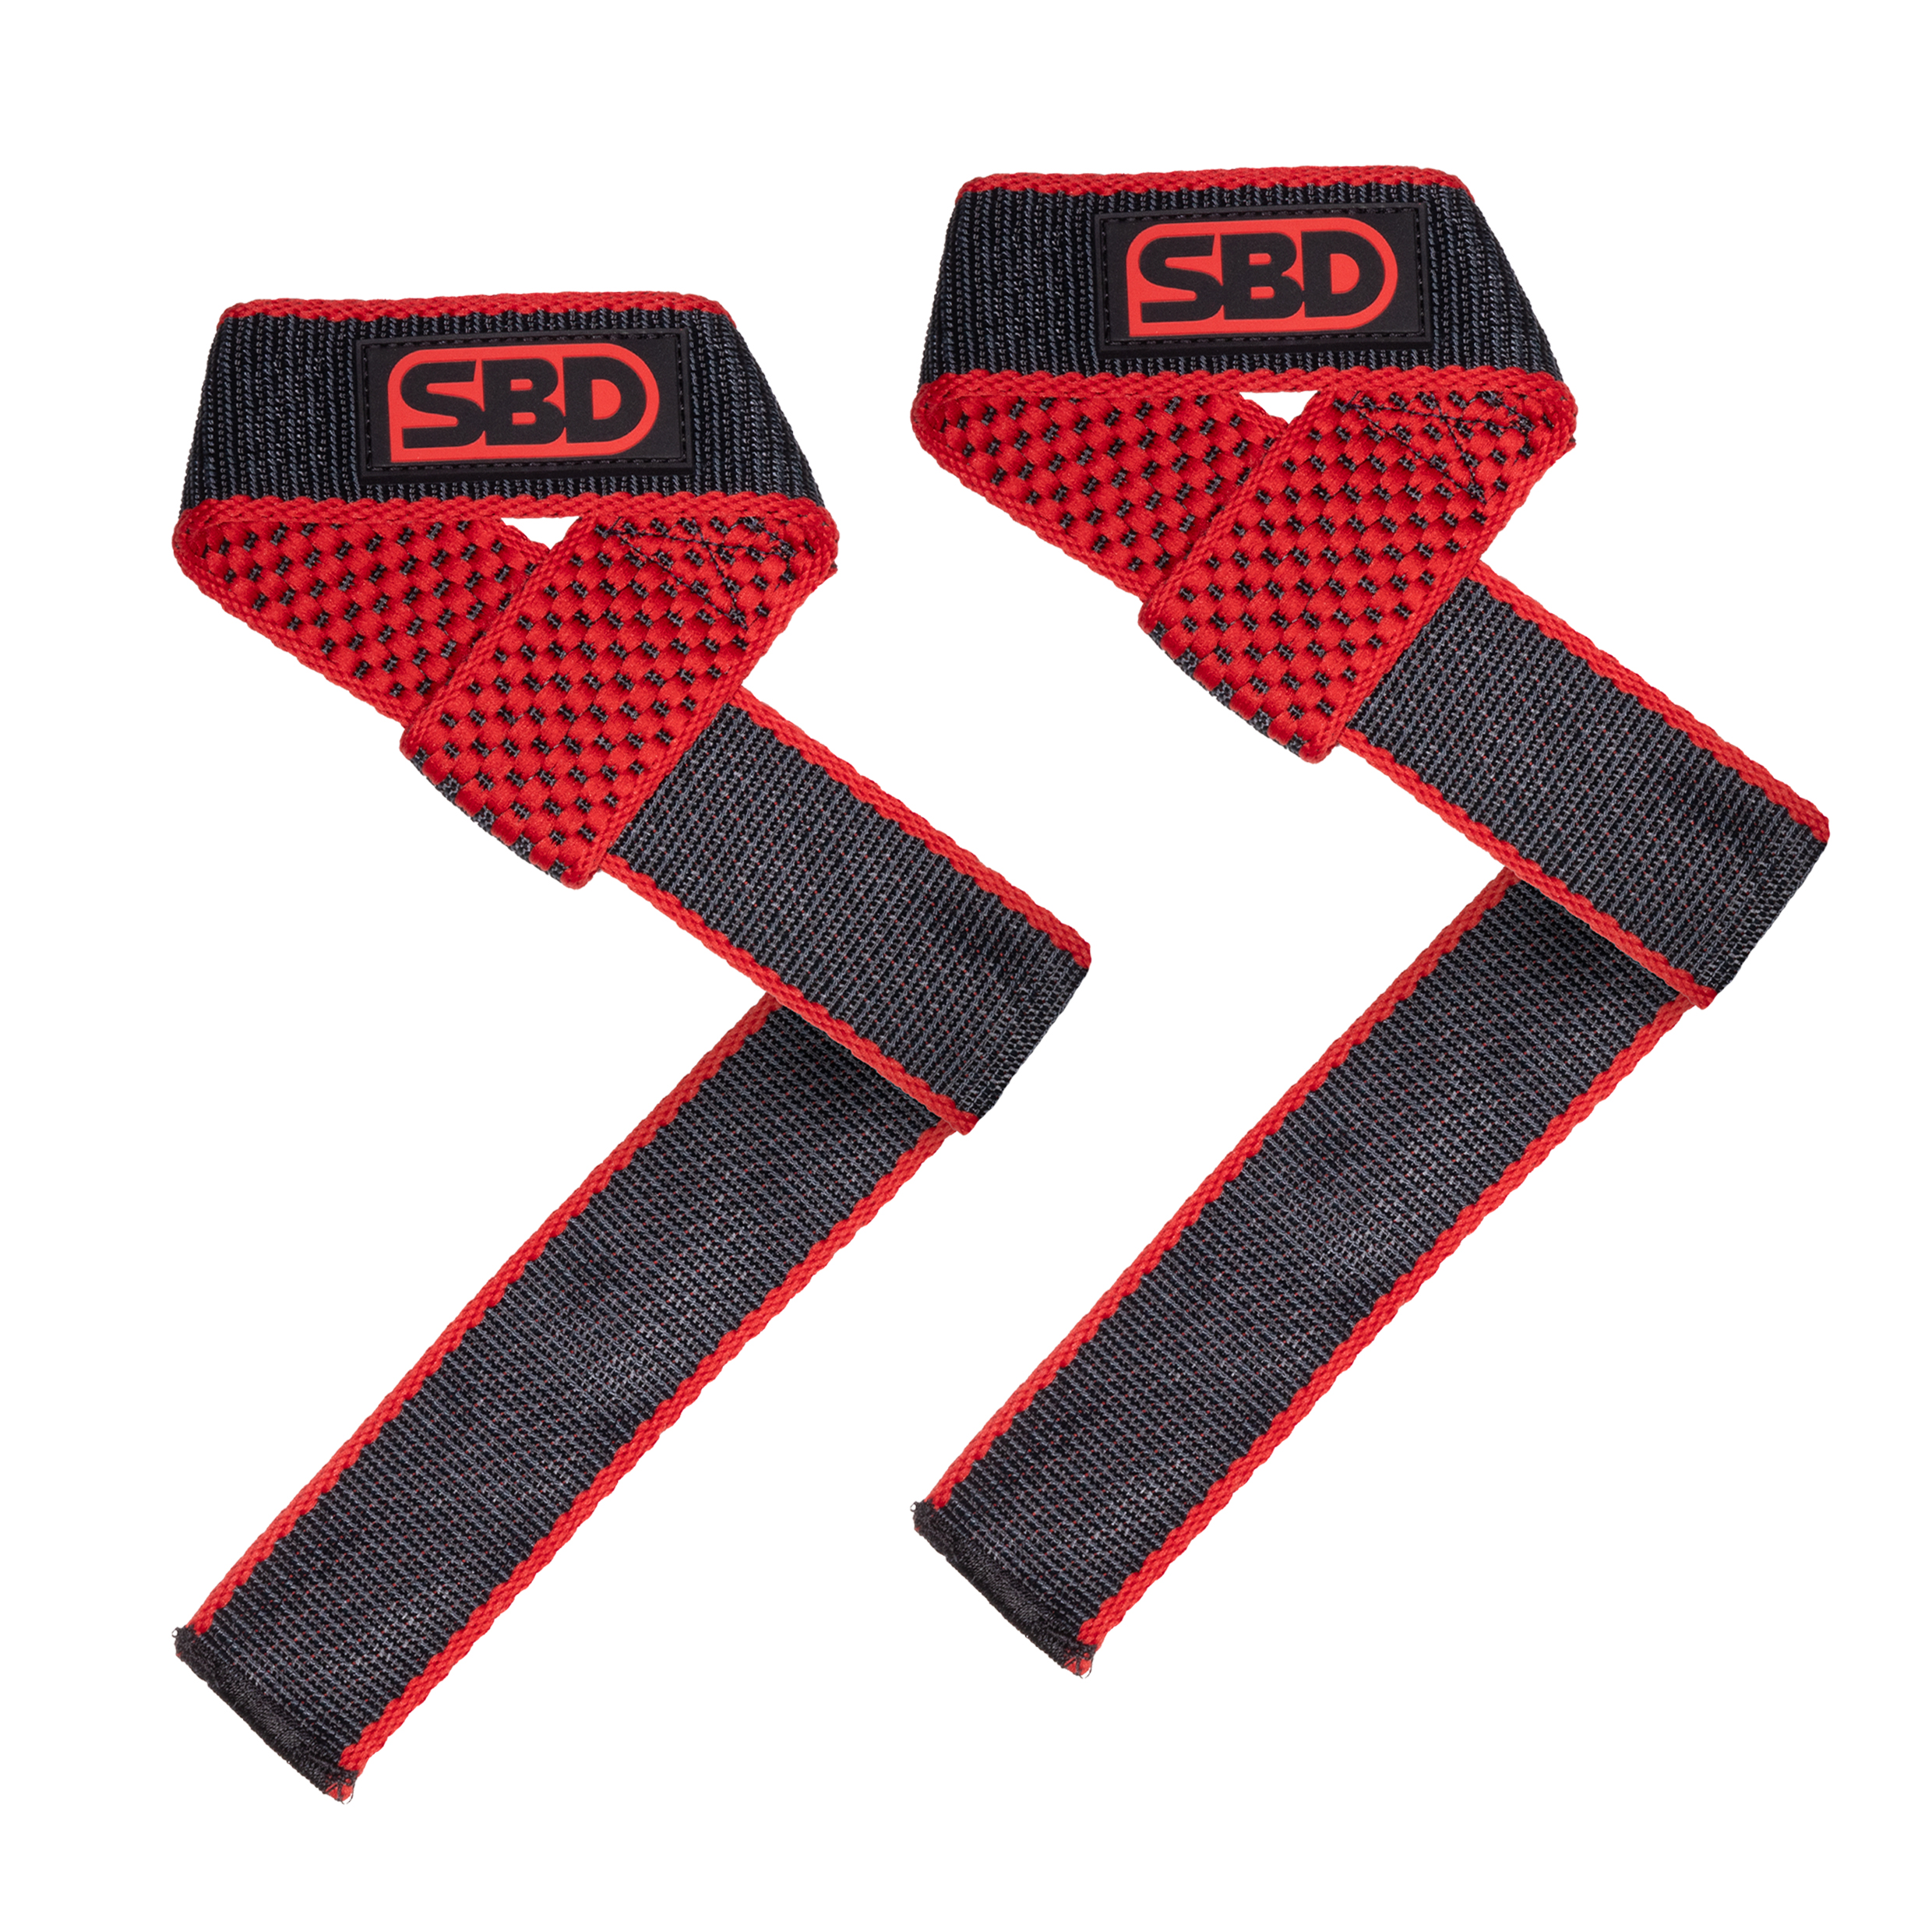 RDX, Figure of 8 lifting strap - Buds Fitness